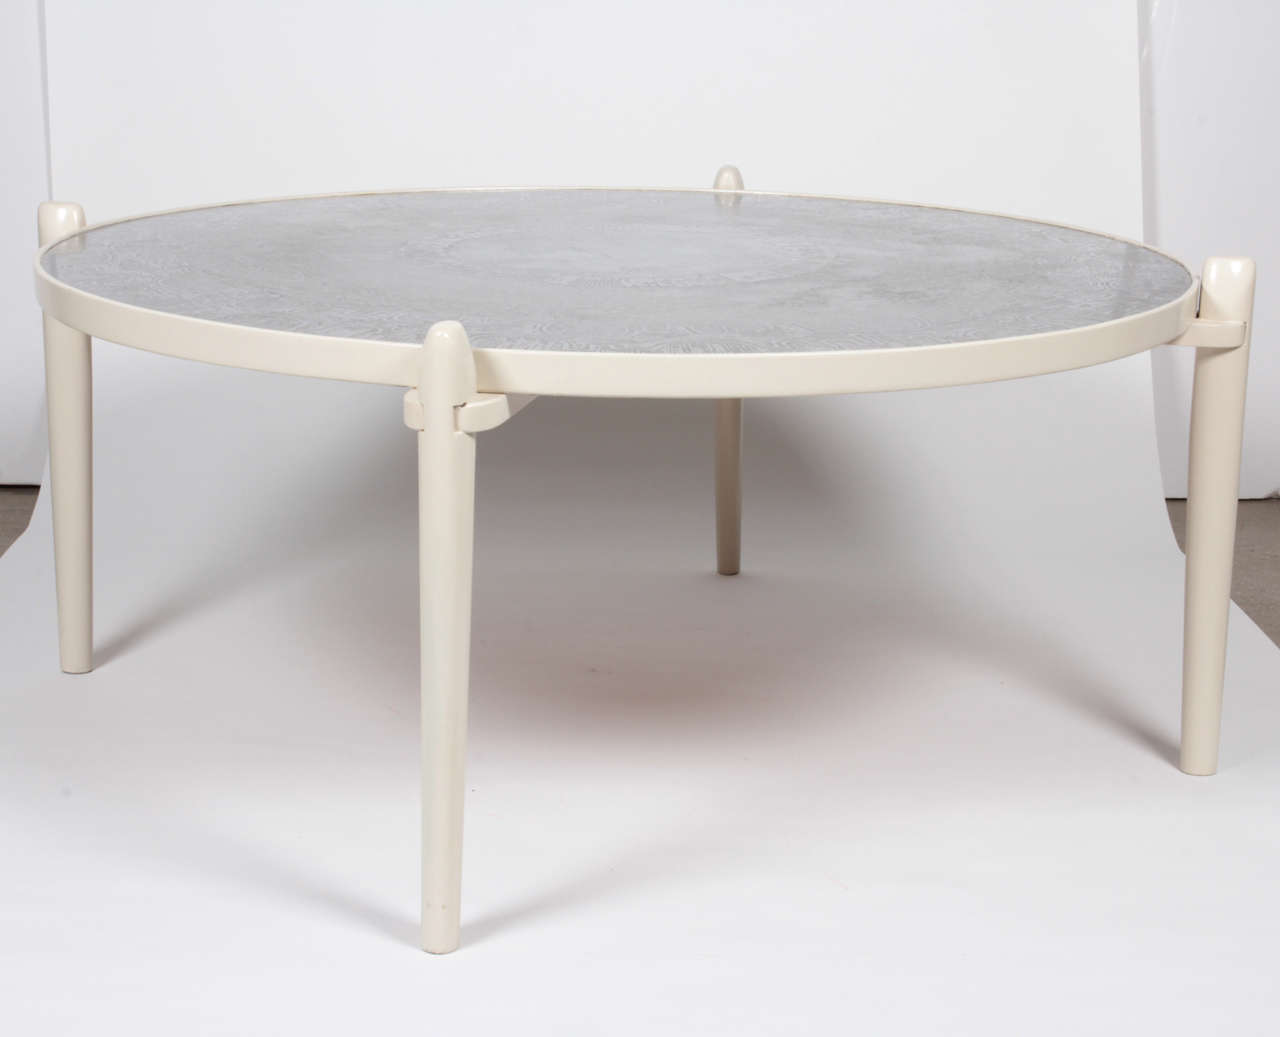 Circular coffee table etched aluminum, white feet in wood.